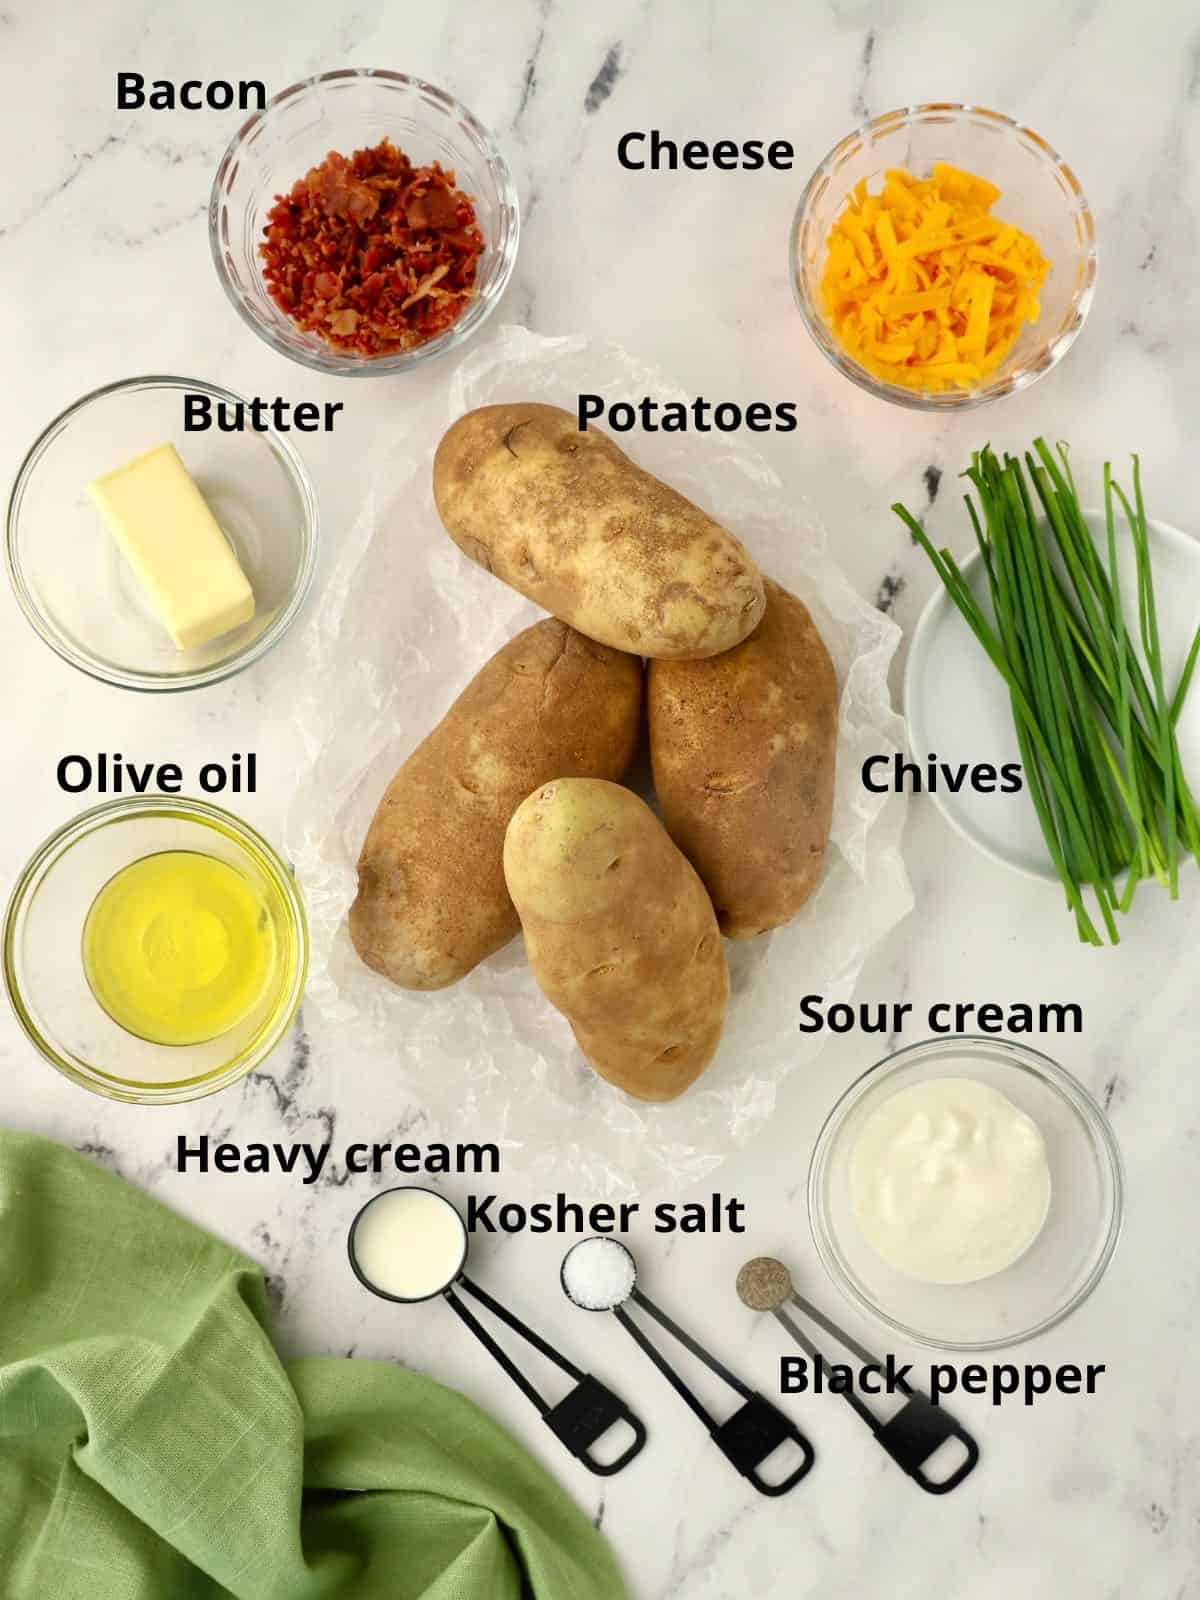 Ingredients for twice baked potatoes including sour cream, cheese and bacon. 